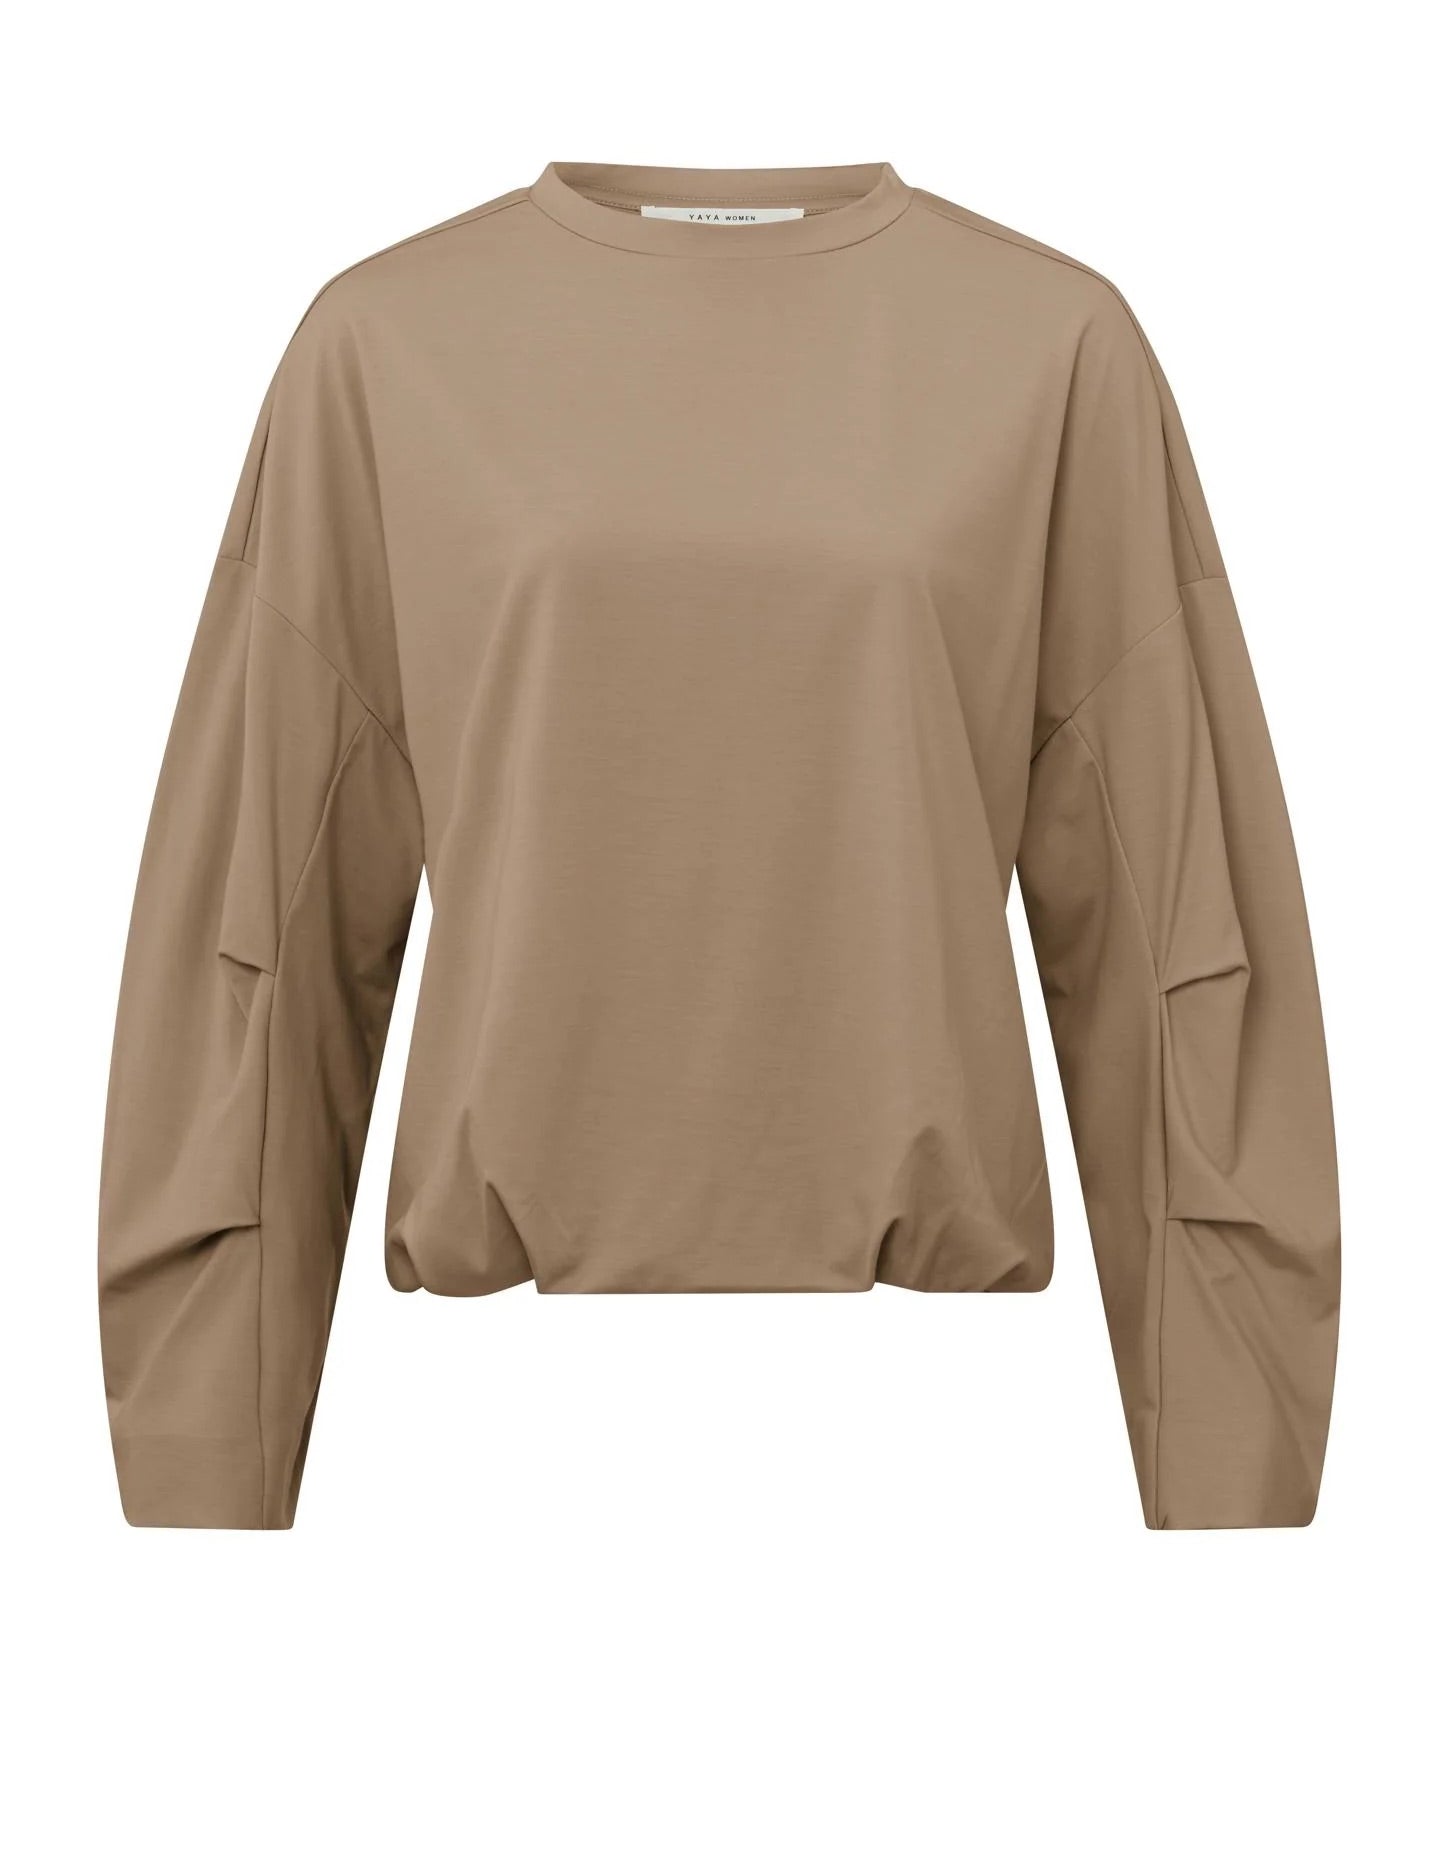 top-with-crewneck-long-sleeves-and-pleated-details-affogato-brown_891db2c5-9f1a-42c2-a841-f7aa0a868e8e_2880x_jpg.jpg